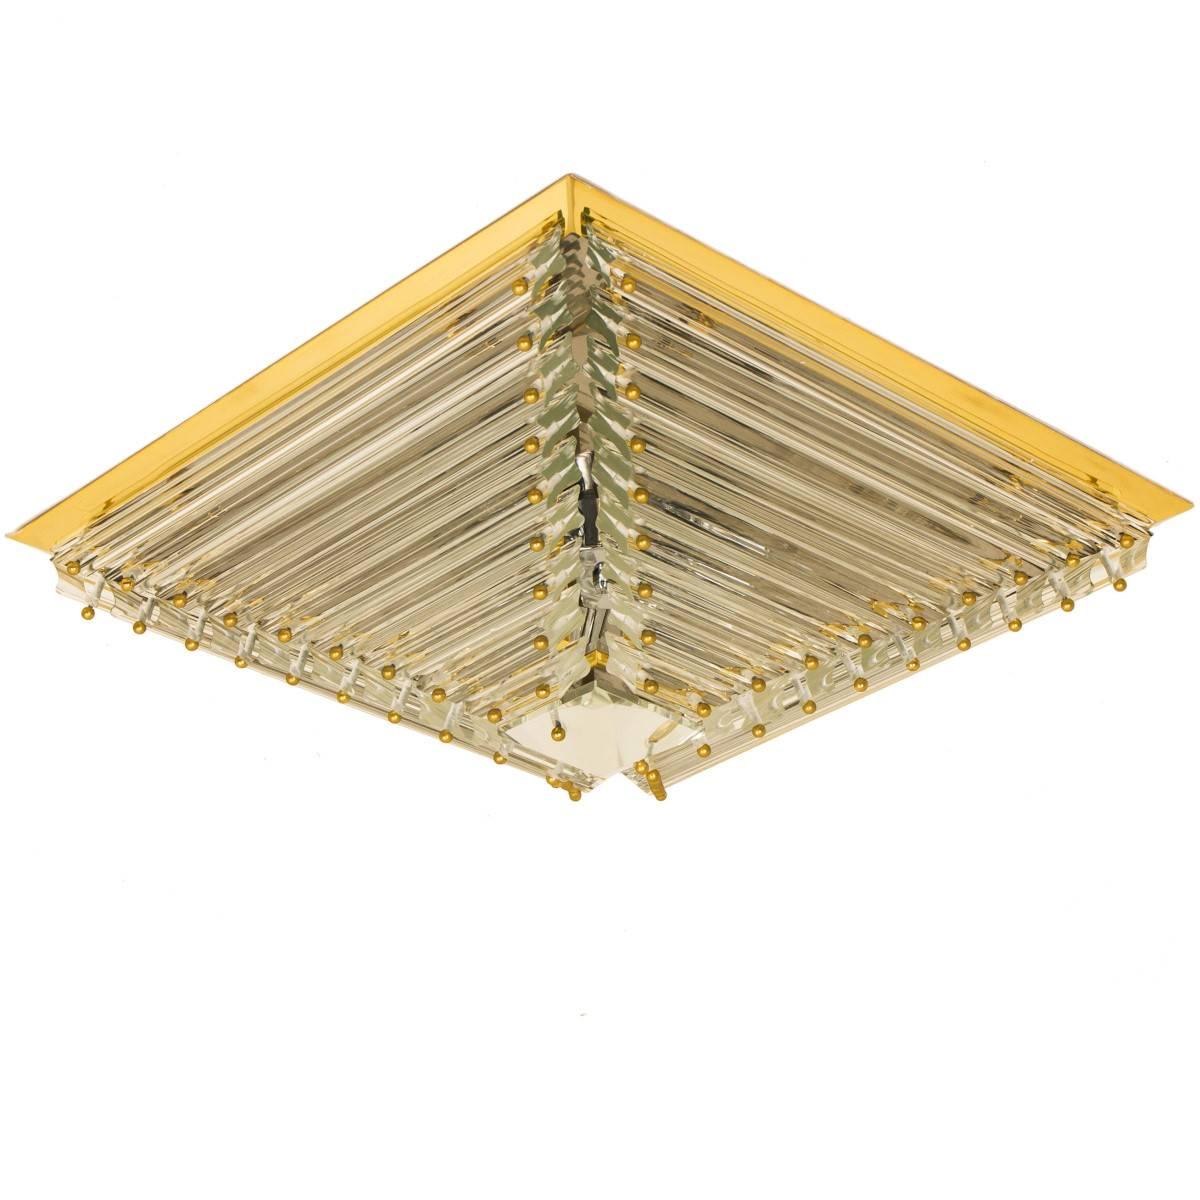 A gold-plated Venini flush mount with faceted clear crystal tubes of Murano glass. Modellated in the form of a pyramid. The flush mounts are designed and produced by Venini in Italy from the 1970s. The Murano tubes are suspended on a gold-plated